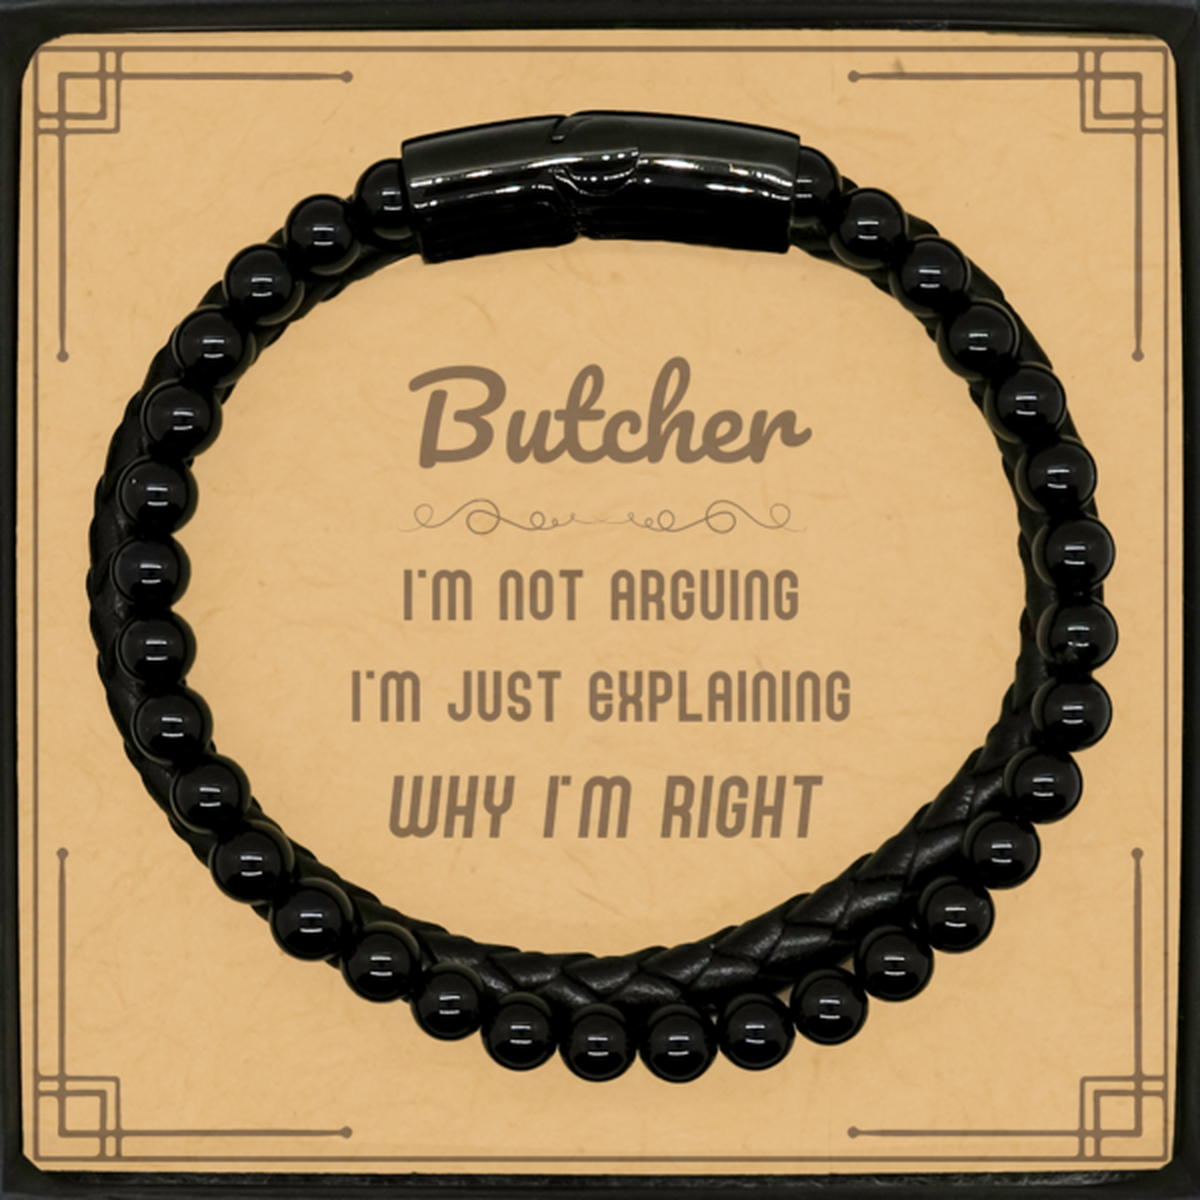 Butcher I'm not Arguing. I'm Just Explaining Why I'm RIGHT Stone Leather Bracelets, Funny Saying Quote Butcher Gifts For Butcher Message Card Graduation Birthday Christmas Gifts for Men Women Coworker